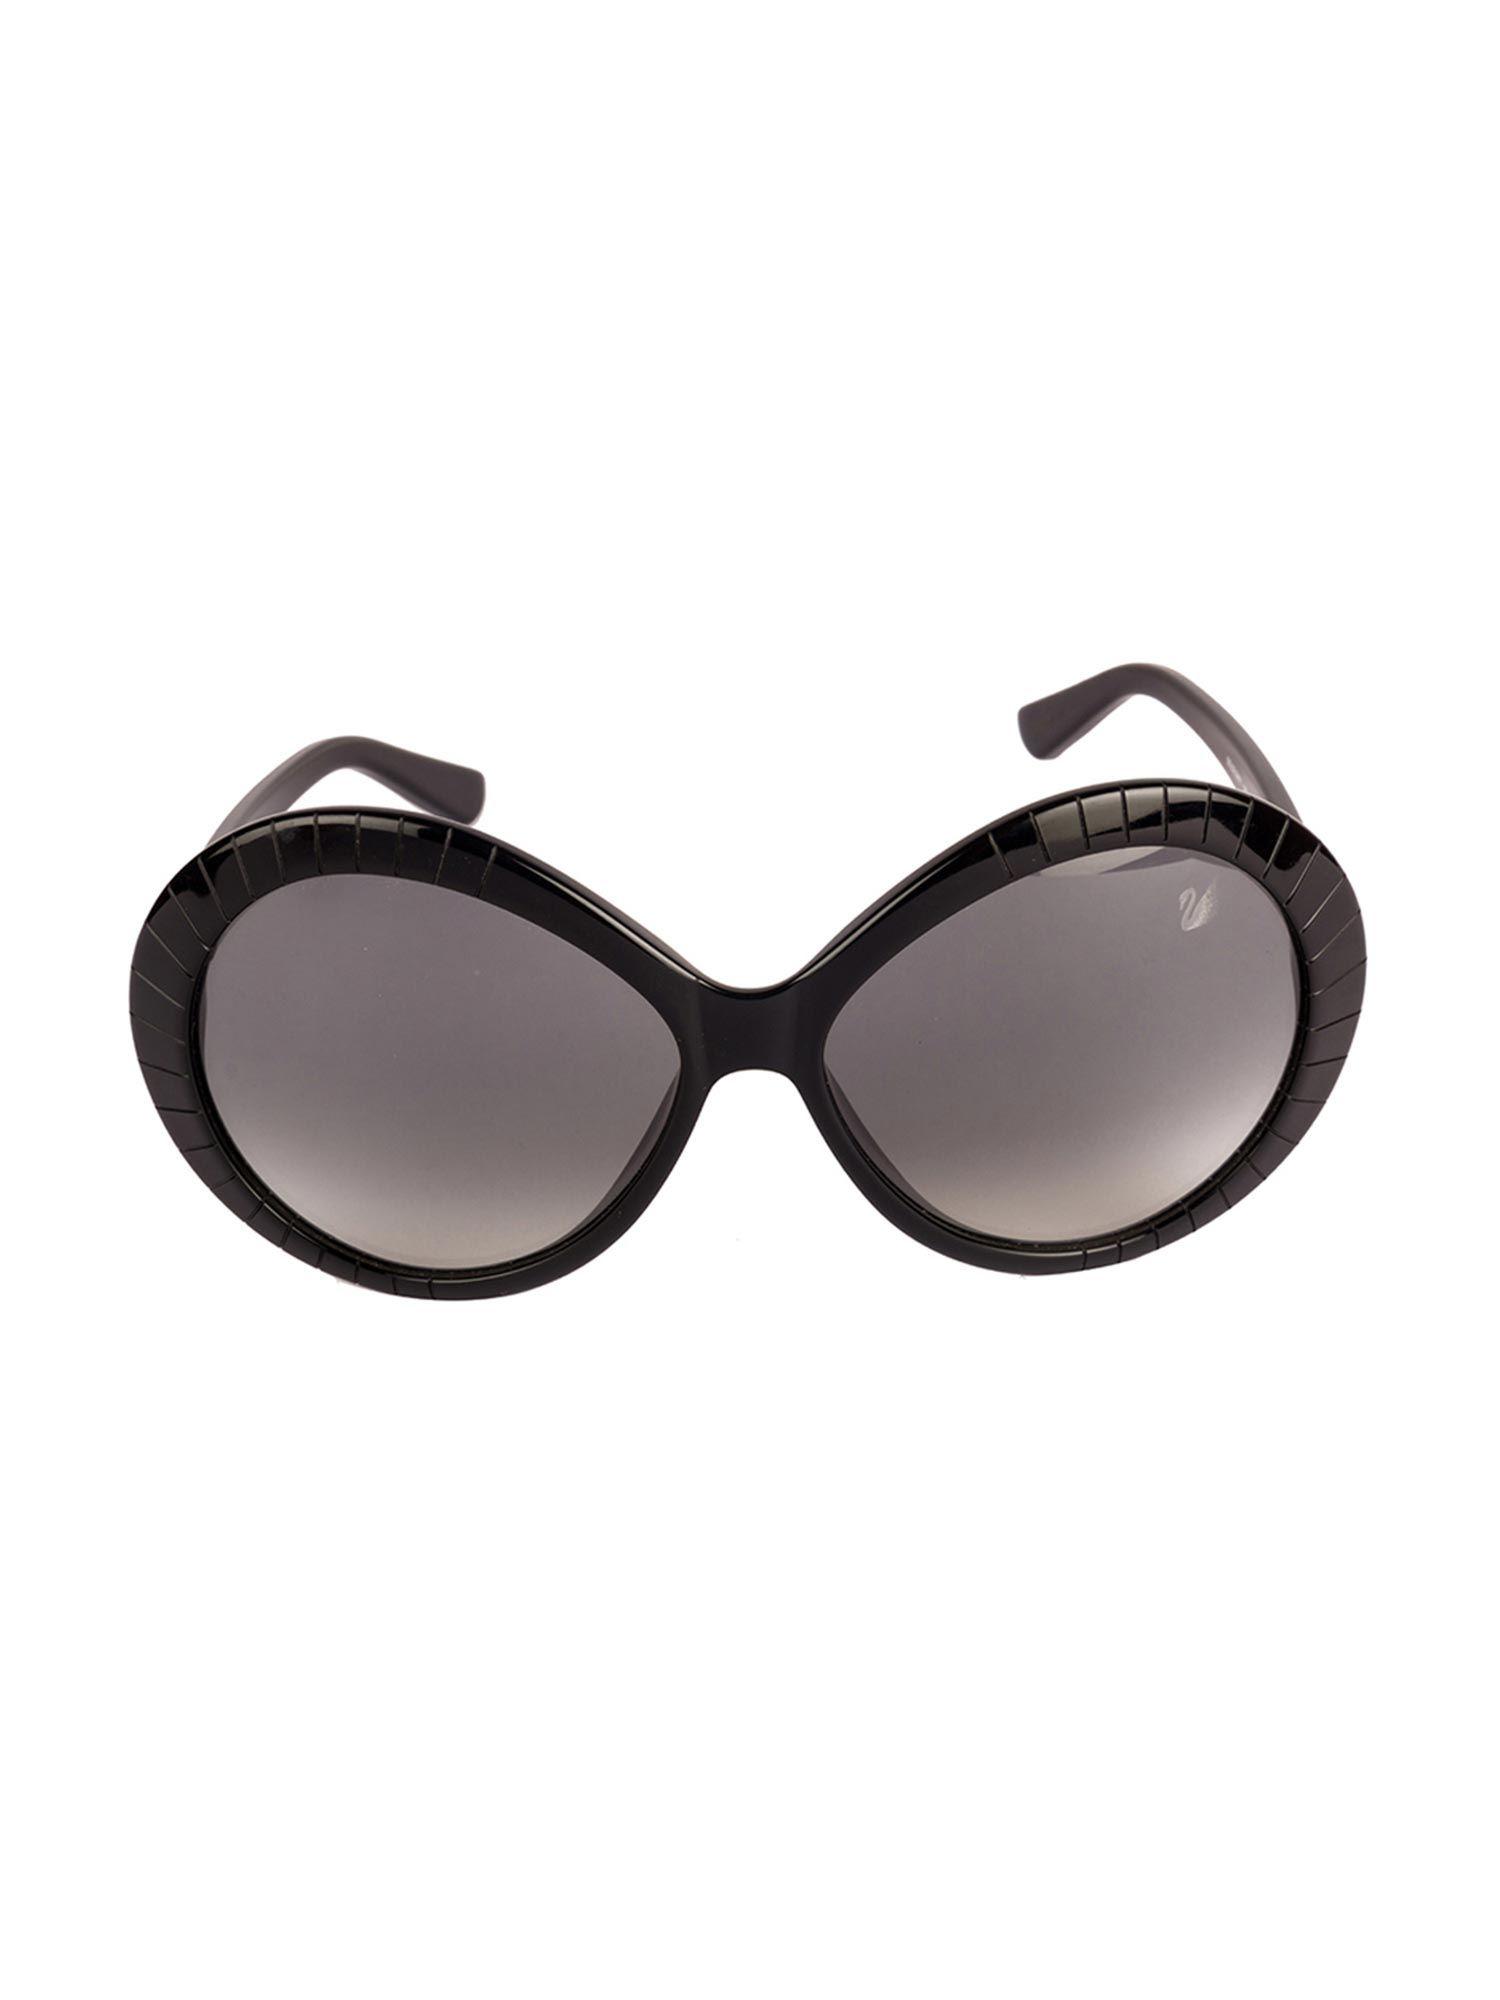 oversized sunglasses with grey lens for women